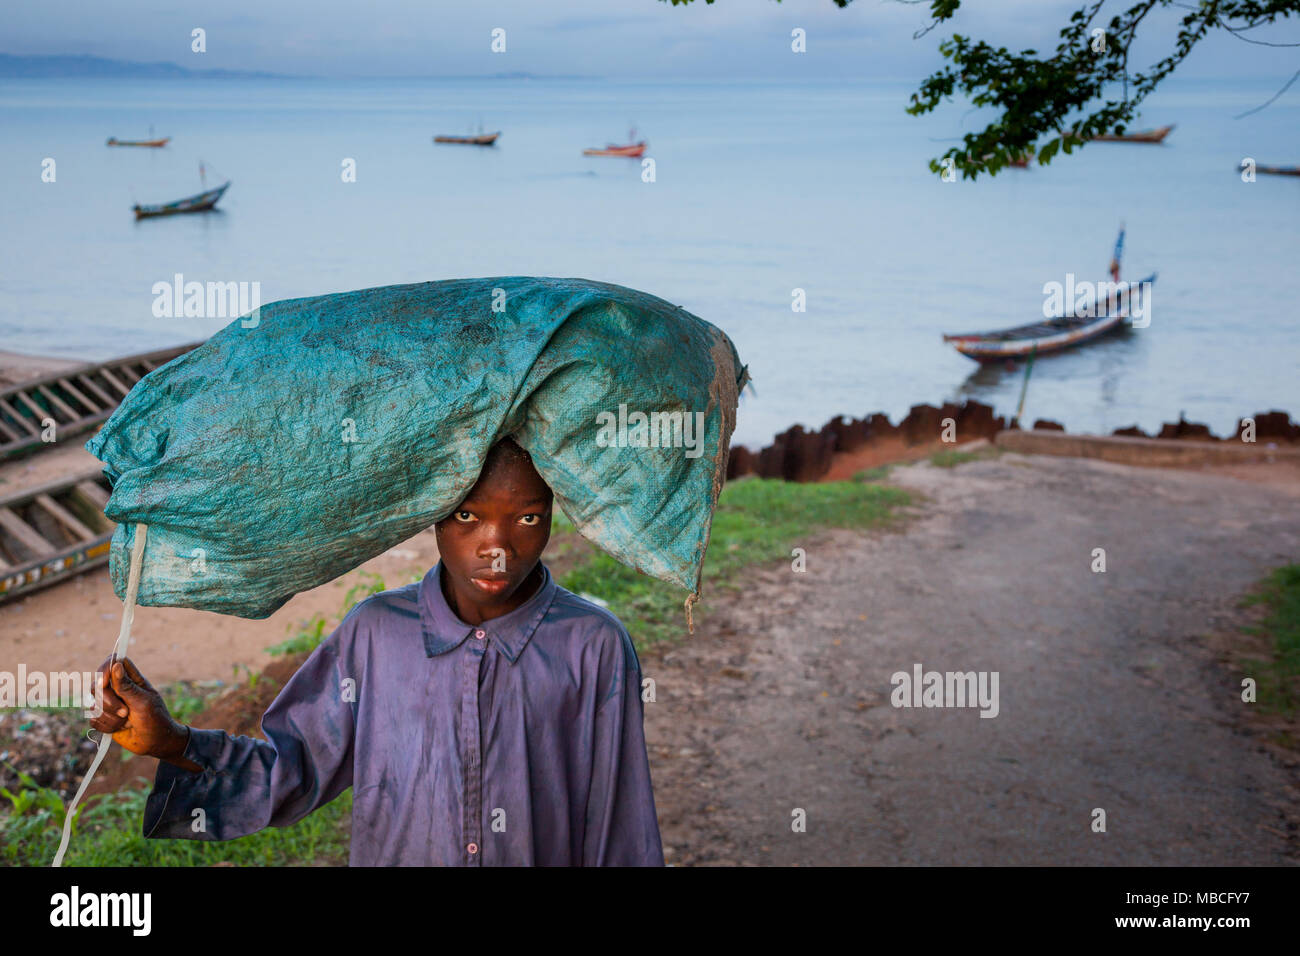 YONGORO, SIERRA LEONE - June 05, 2013: West Africa, unknown boy carries a bag on his shoulders near the beach with fishing boats in front of the capit Stock Photo